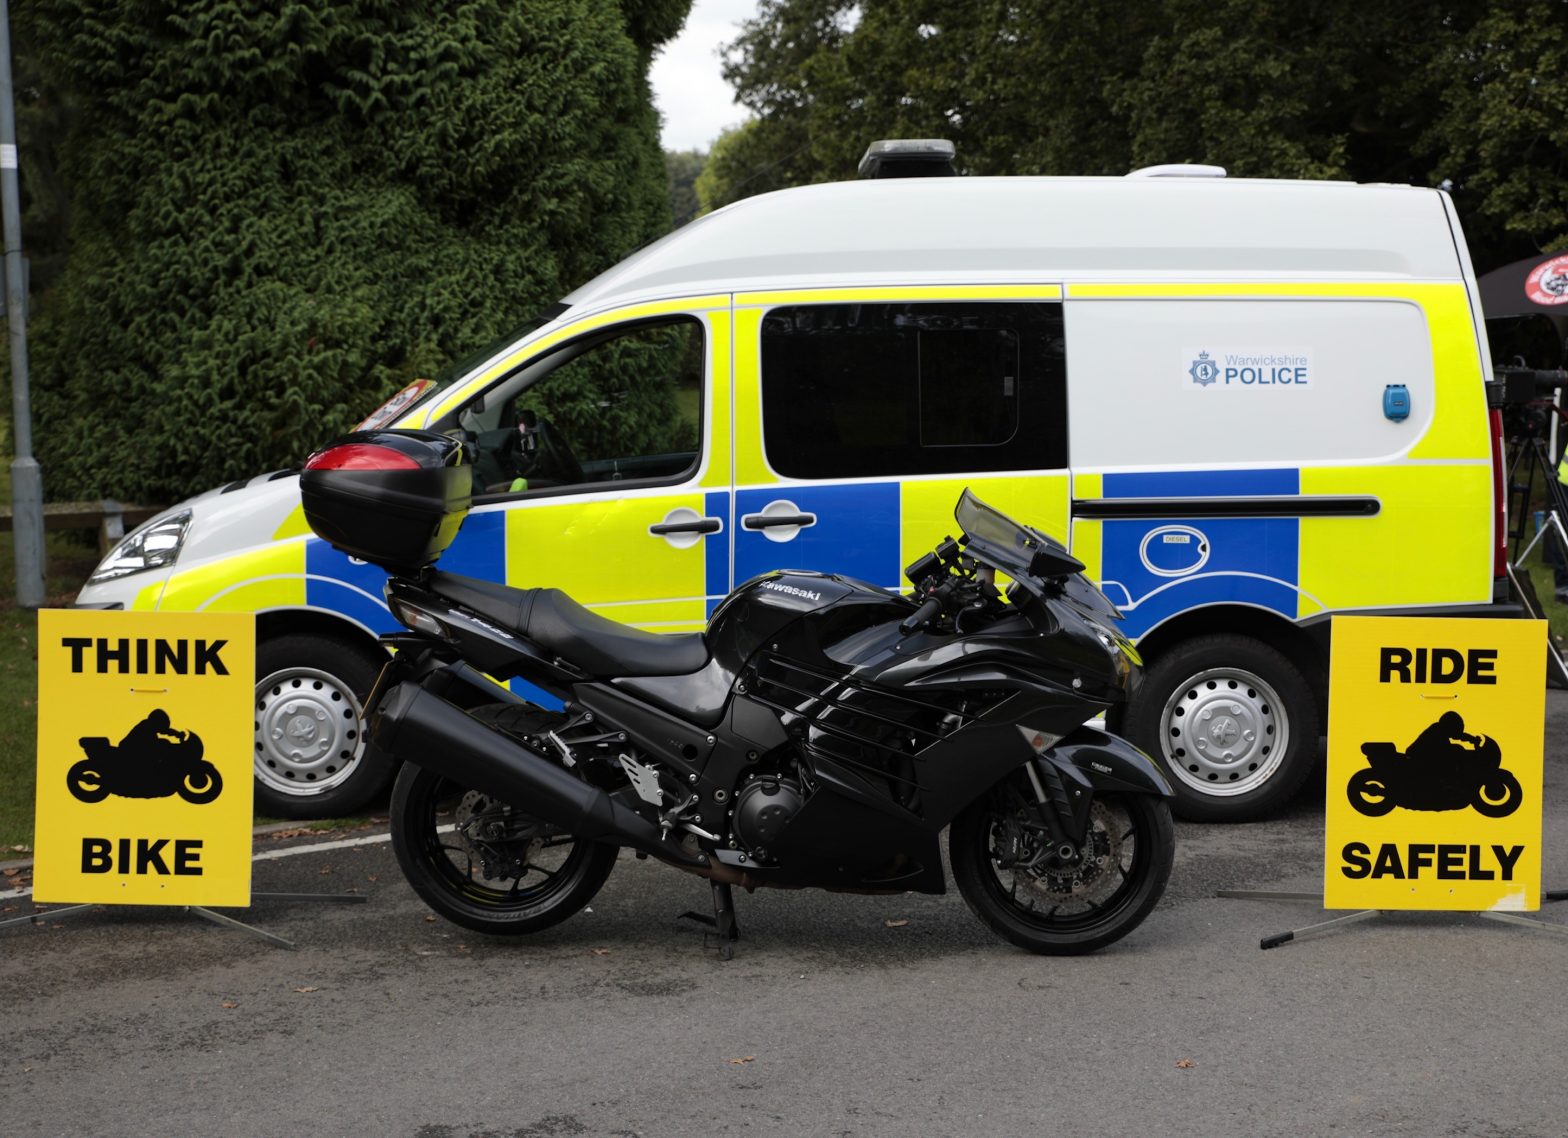 THINK BIKE signage with a police van and motorbike